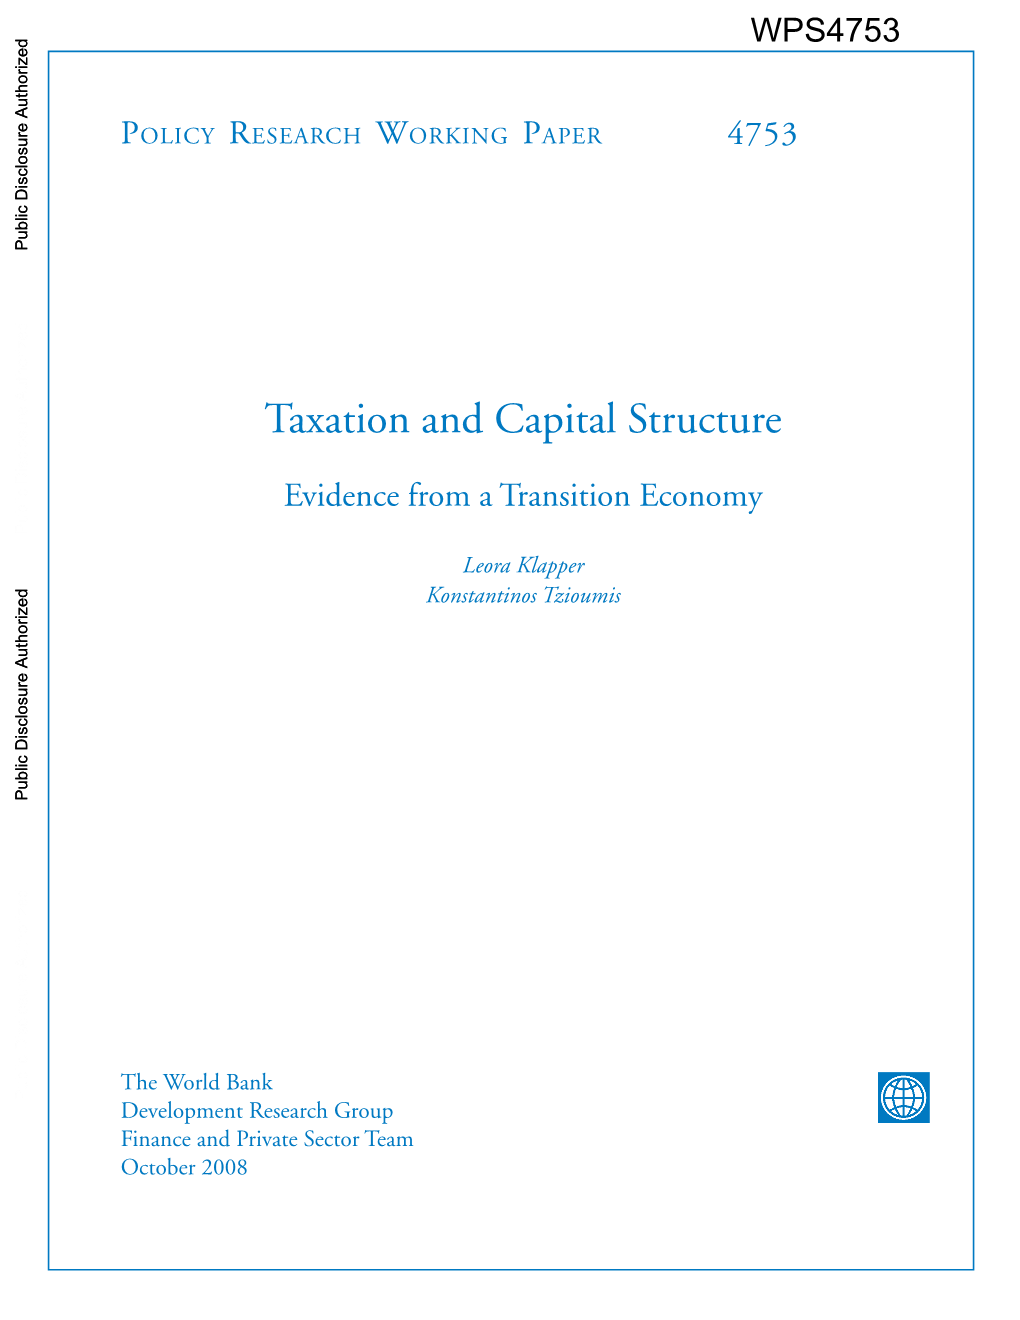 Taxation and Capital Structure